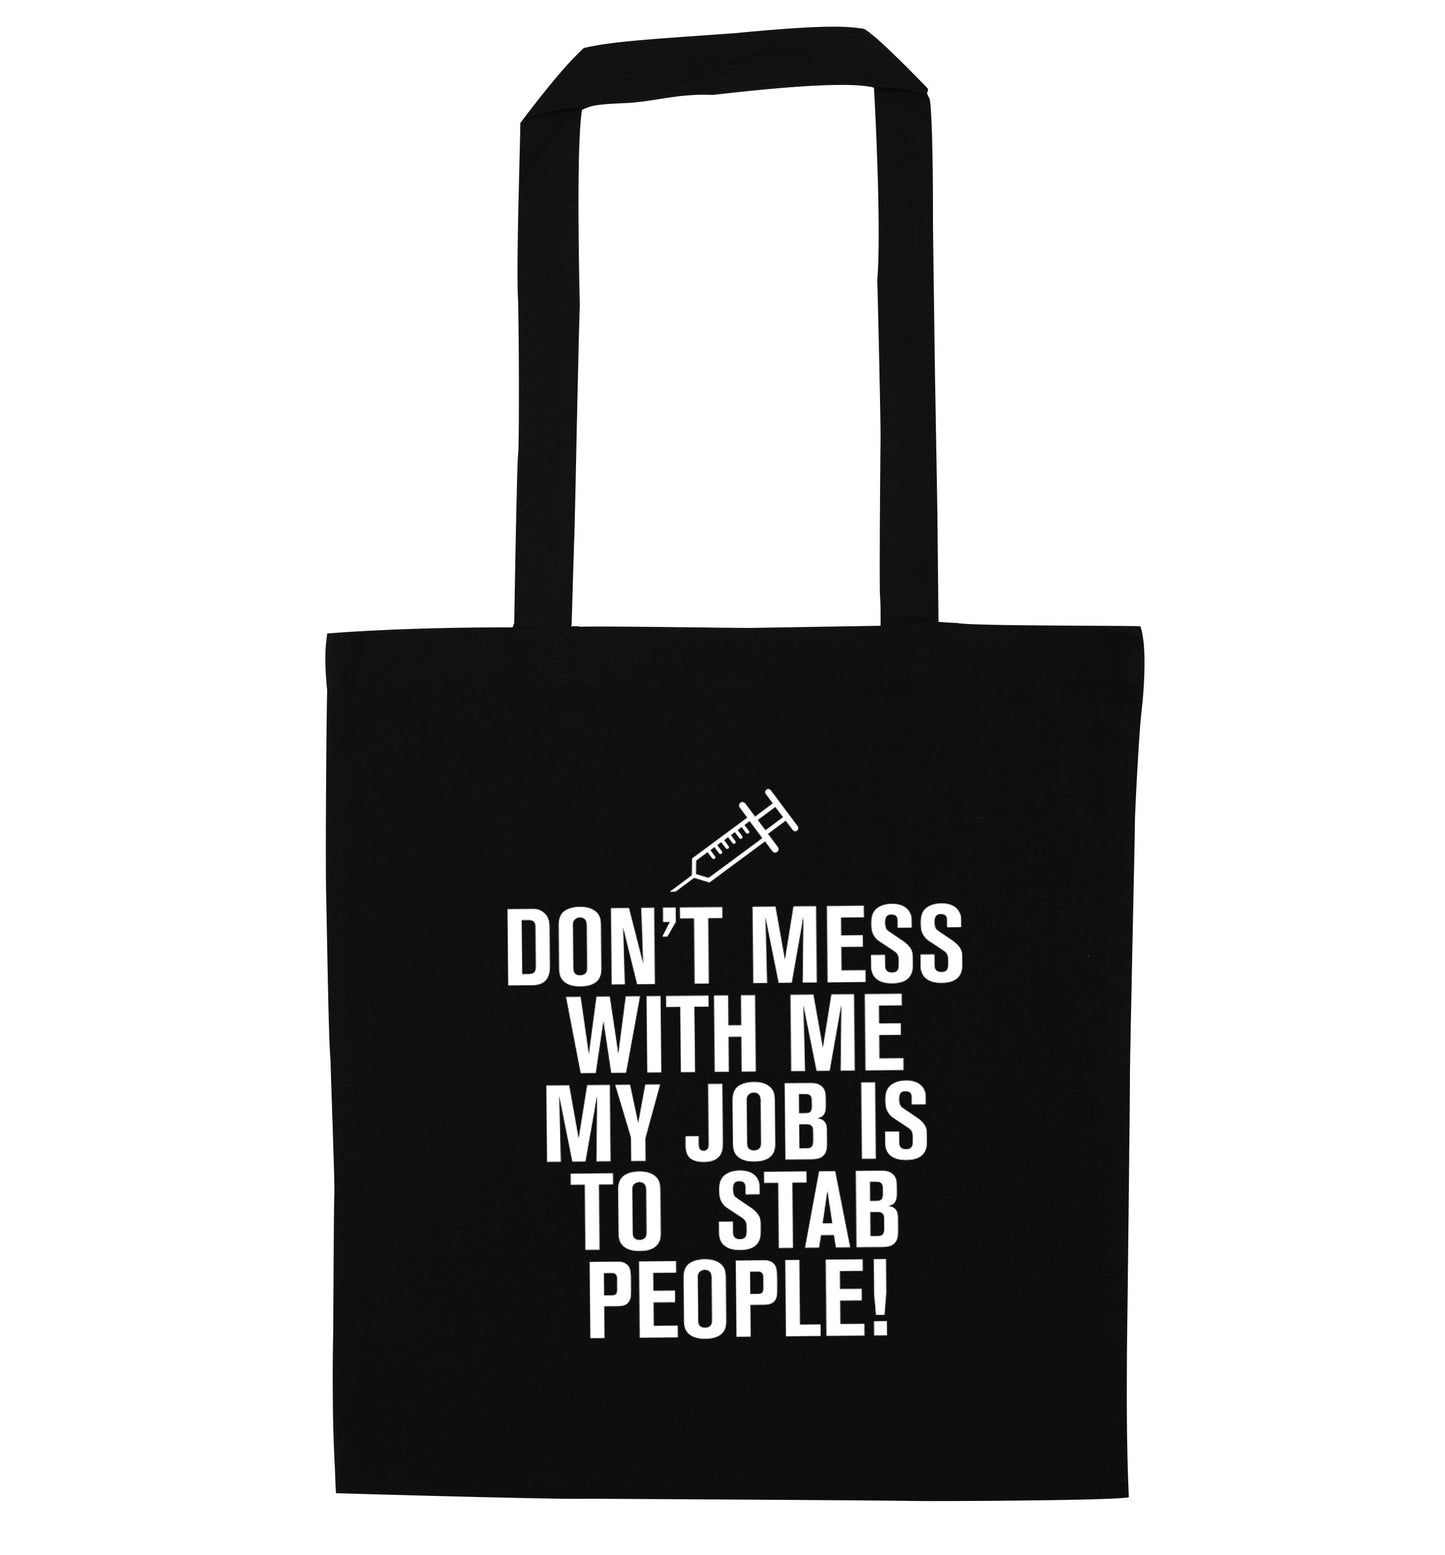 Don't mess with me my job is to stab people! black tote bag